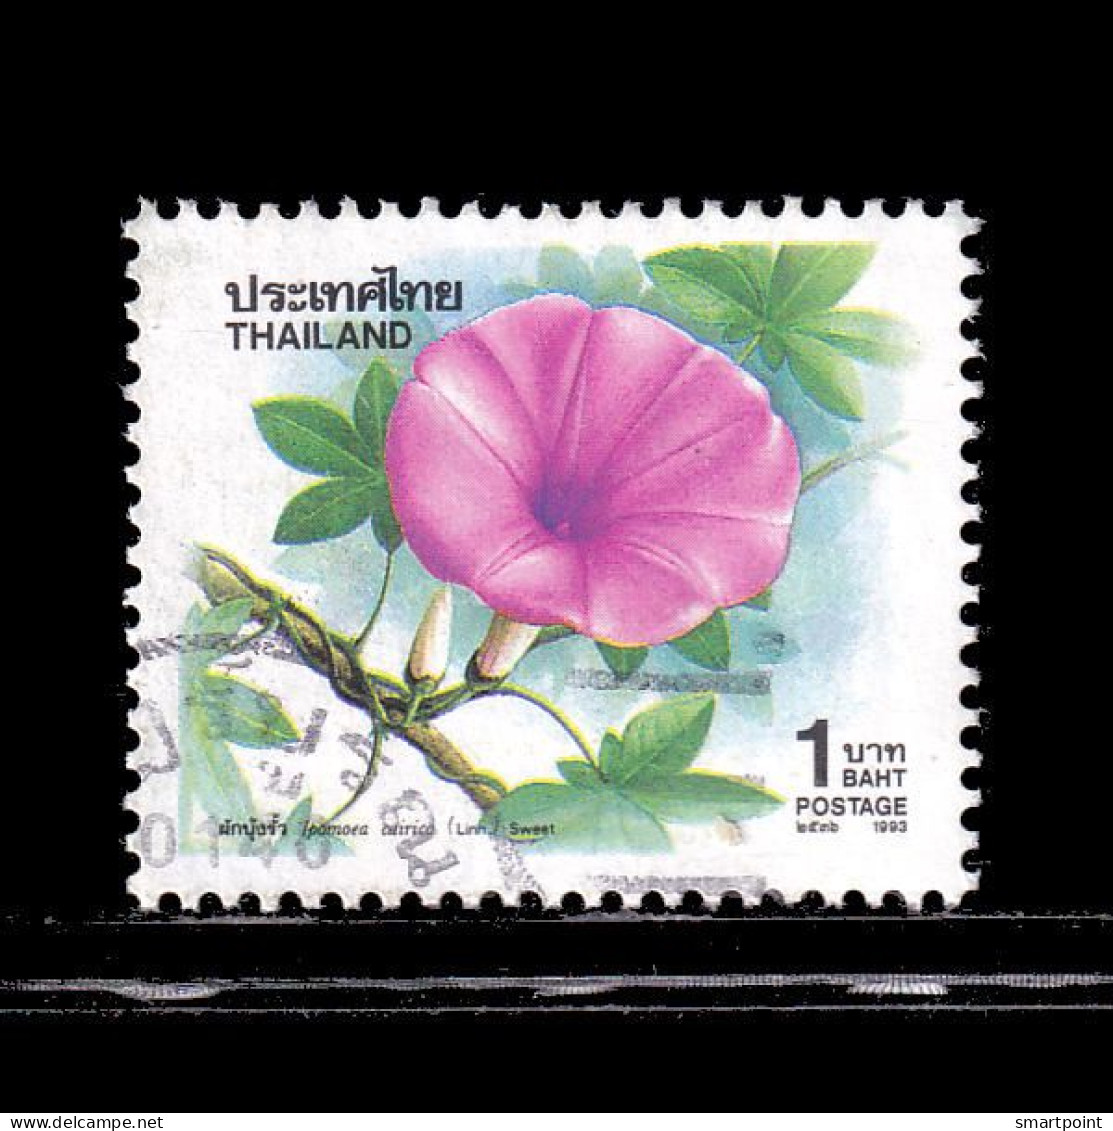 Thailand Stamp 1993 1994 New Year (6th Series) 1 Baht - Used - Thailand